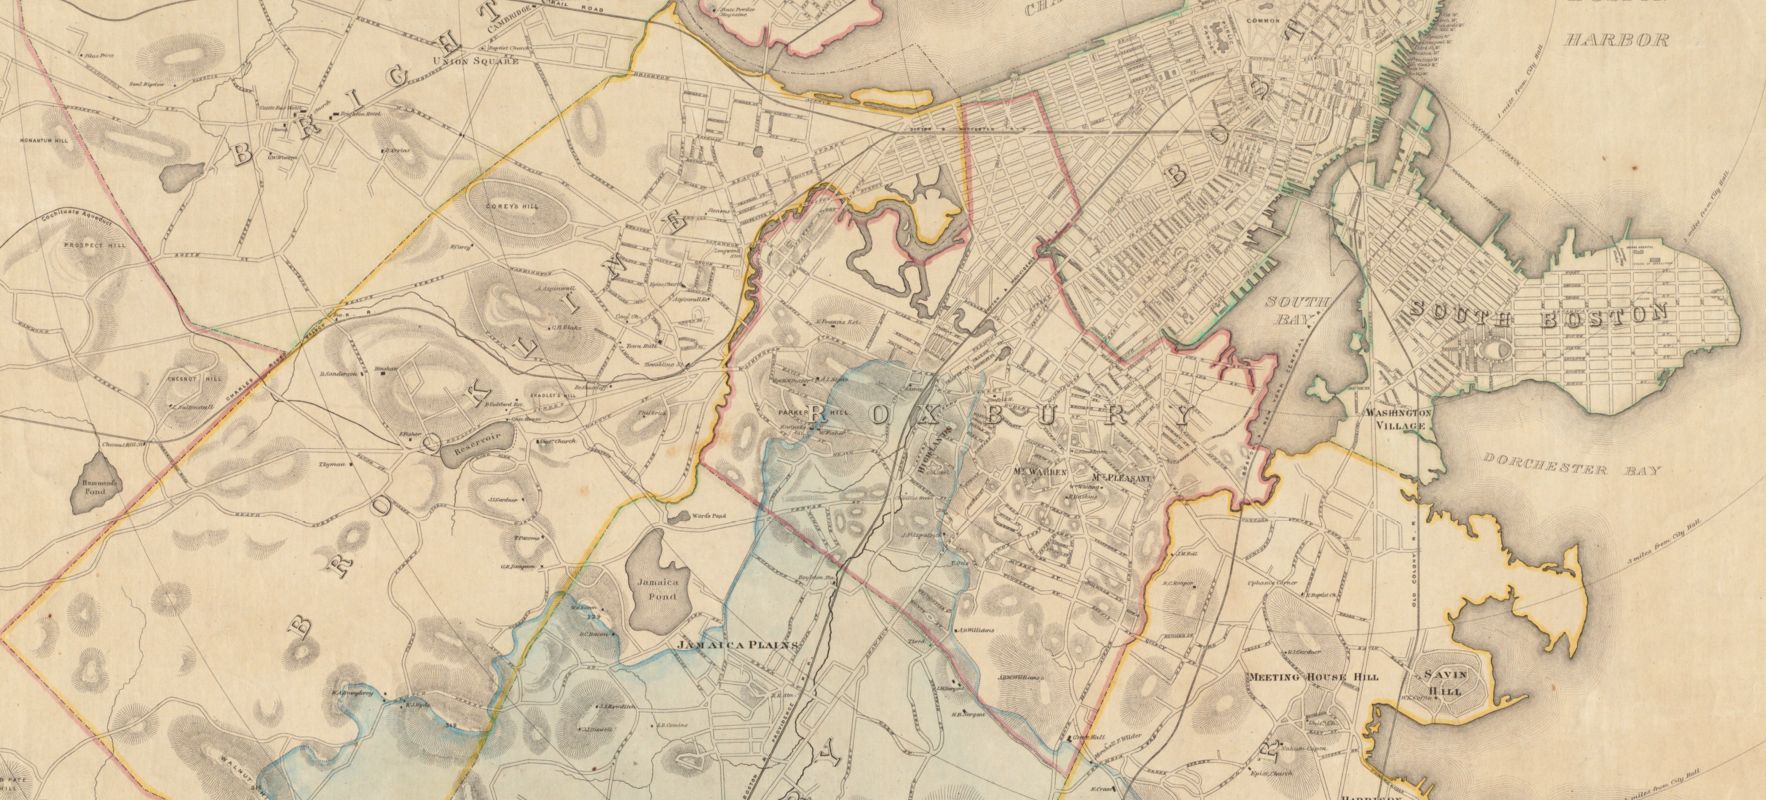 As the Back Bay neighborhood of Boston was filled to make new land, nineteenth-century Bostonians were forced to consider the natural geographies that connected land and water. The Stony Brook watershed, shown in blue on this 1860s map, crossed multiple then-independent towns, raising questions about what happens when social and ecological boundaries cross each other.